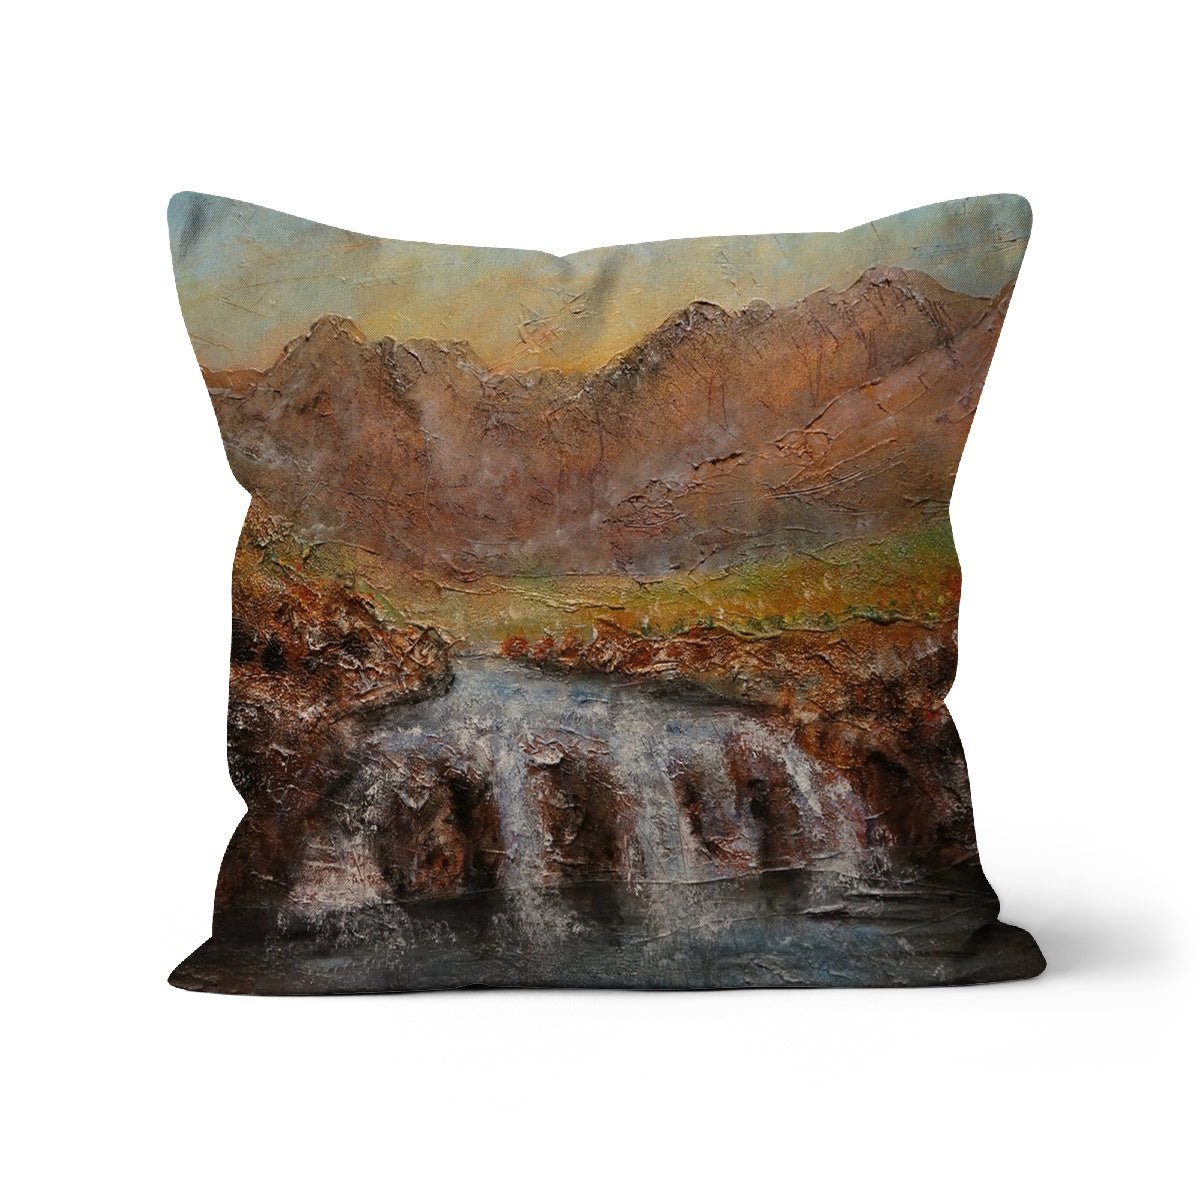 Fairy Pools Dawn Skye Art Gifts Cushion-Cushions-Skye Art Gallery-Linen-12"x12"-Paintings, Prints, Homeware, Art Gifts From Scotland By Scottish Artist Kevin Hunter